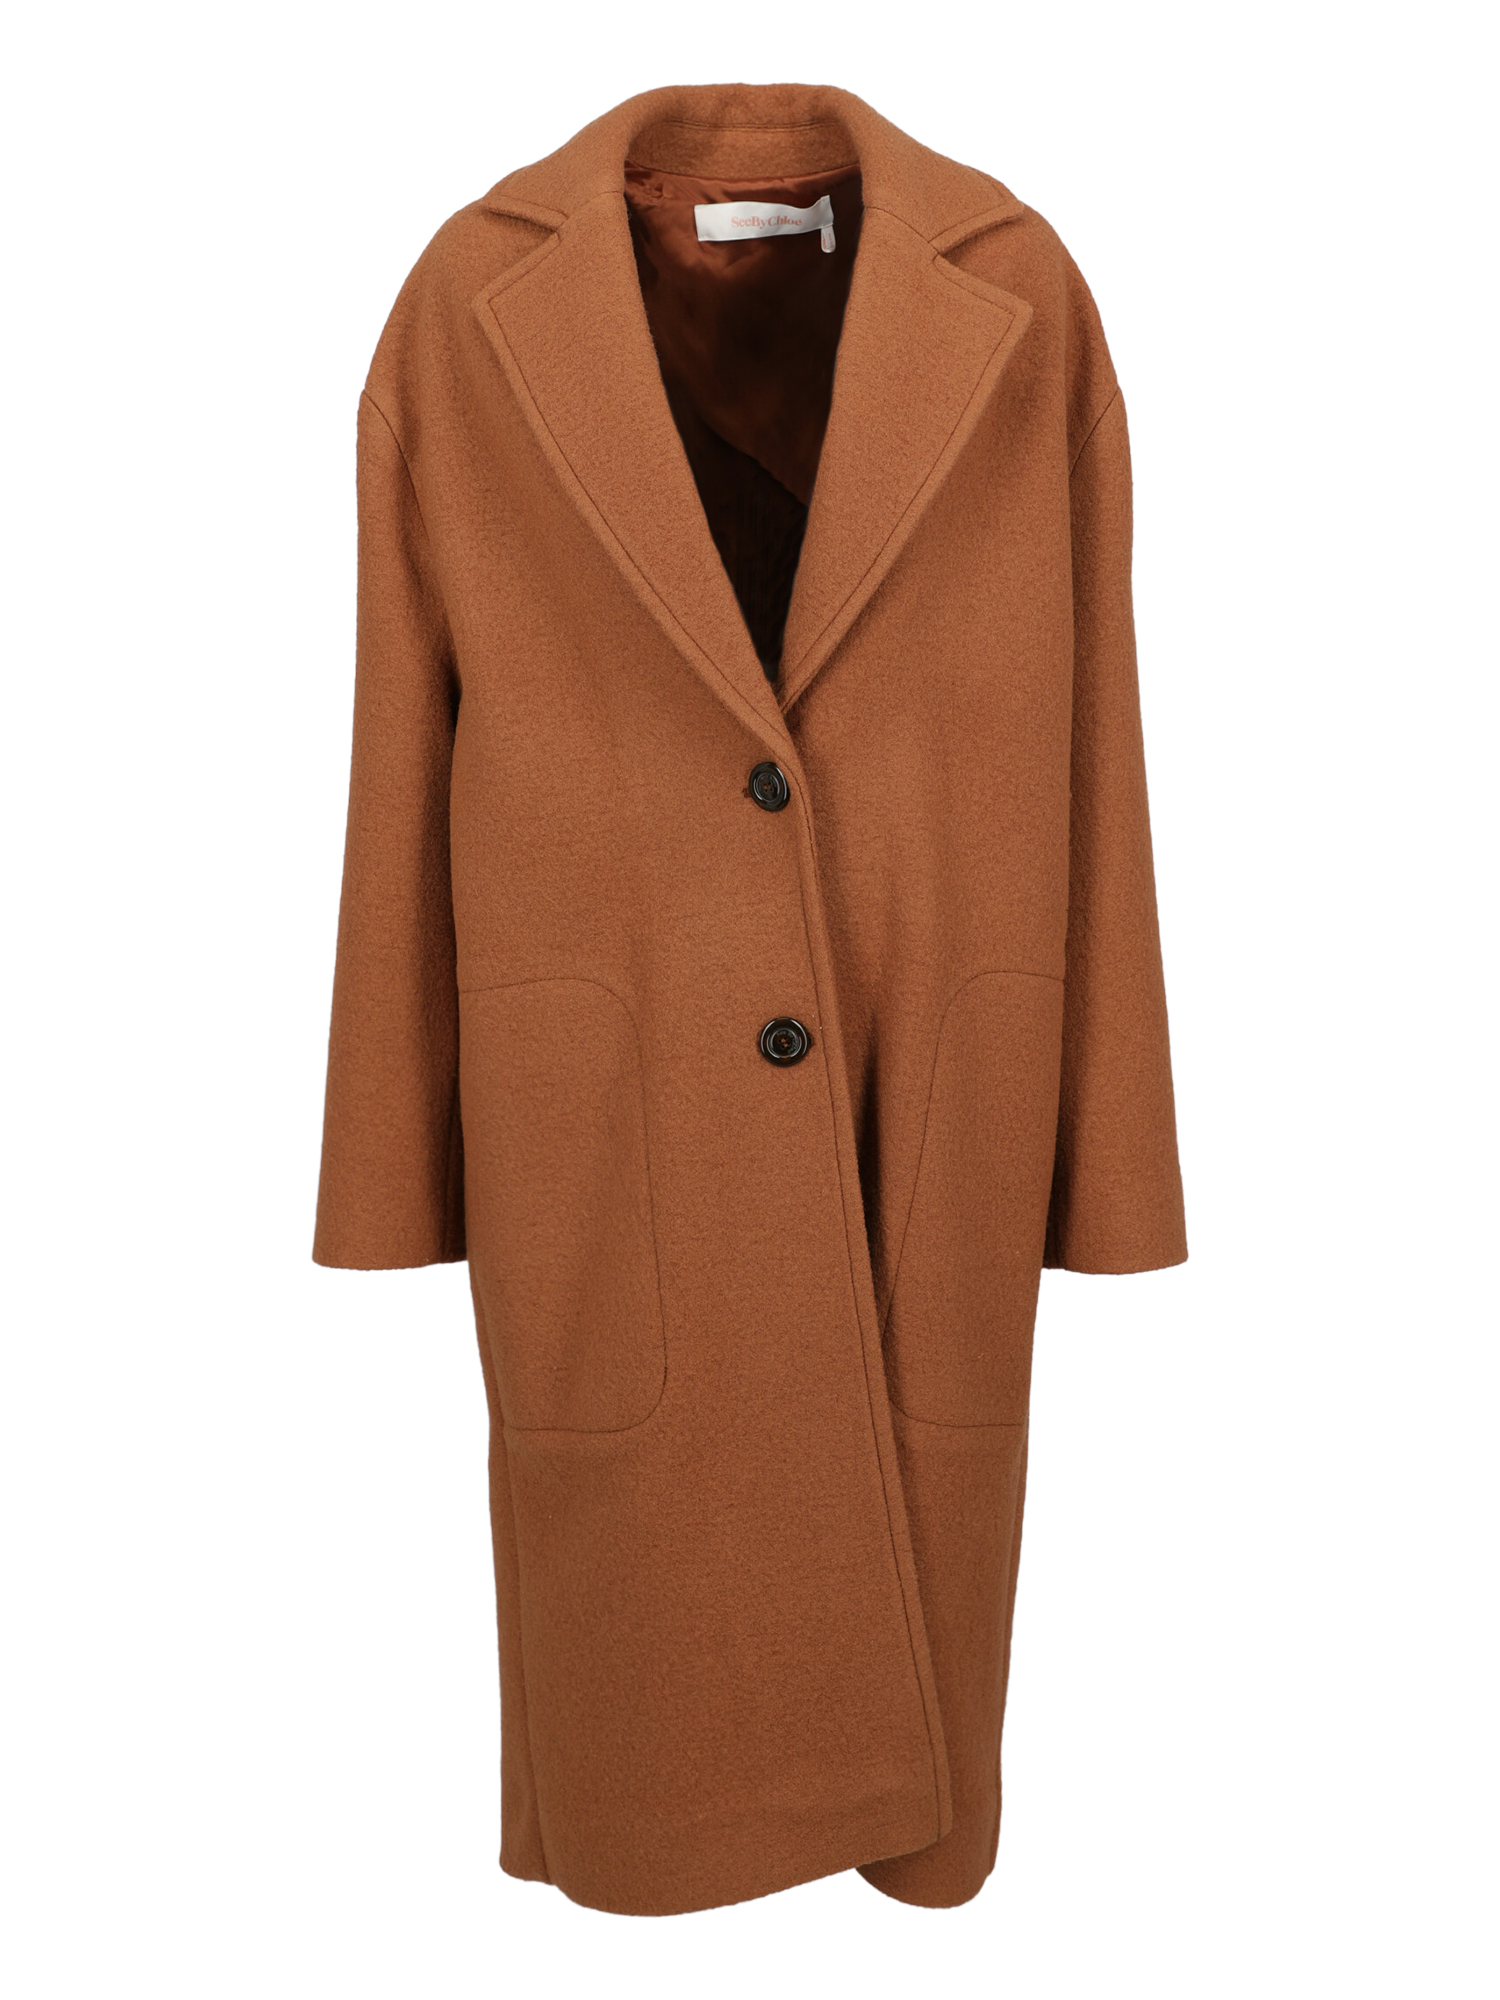 See By Chloé Women's Outwear -  - In Camel Color Wool